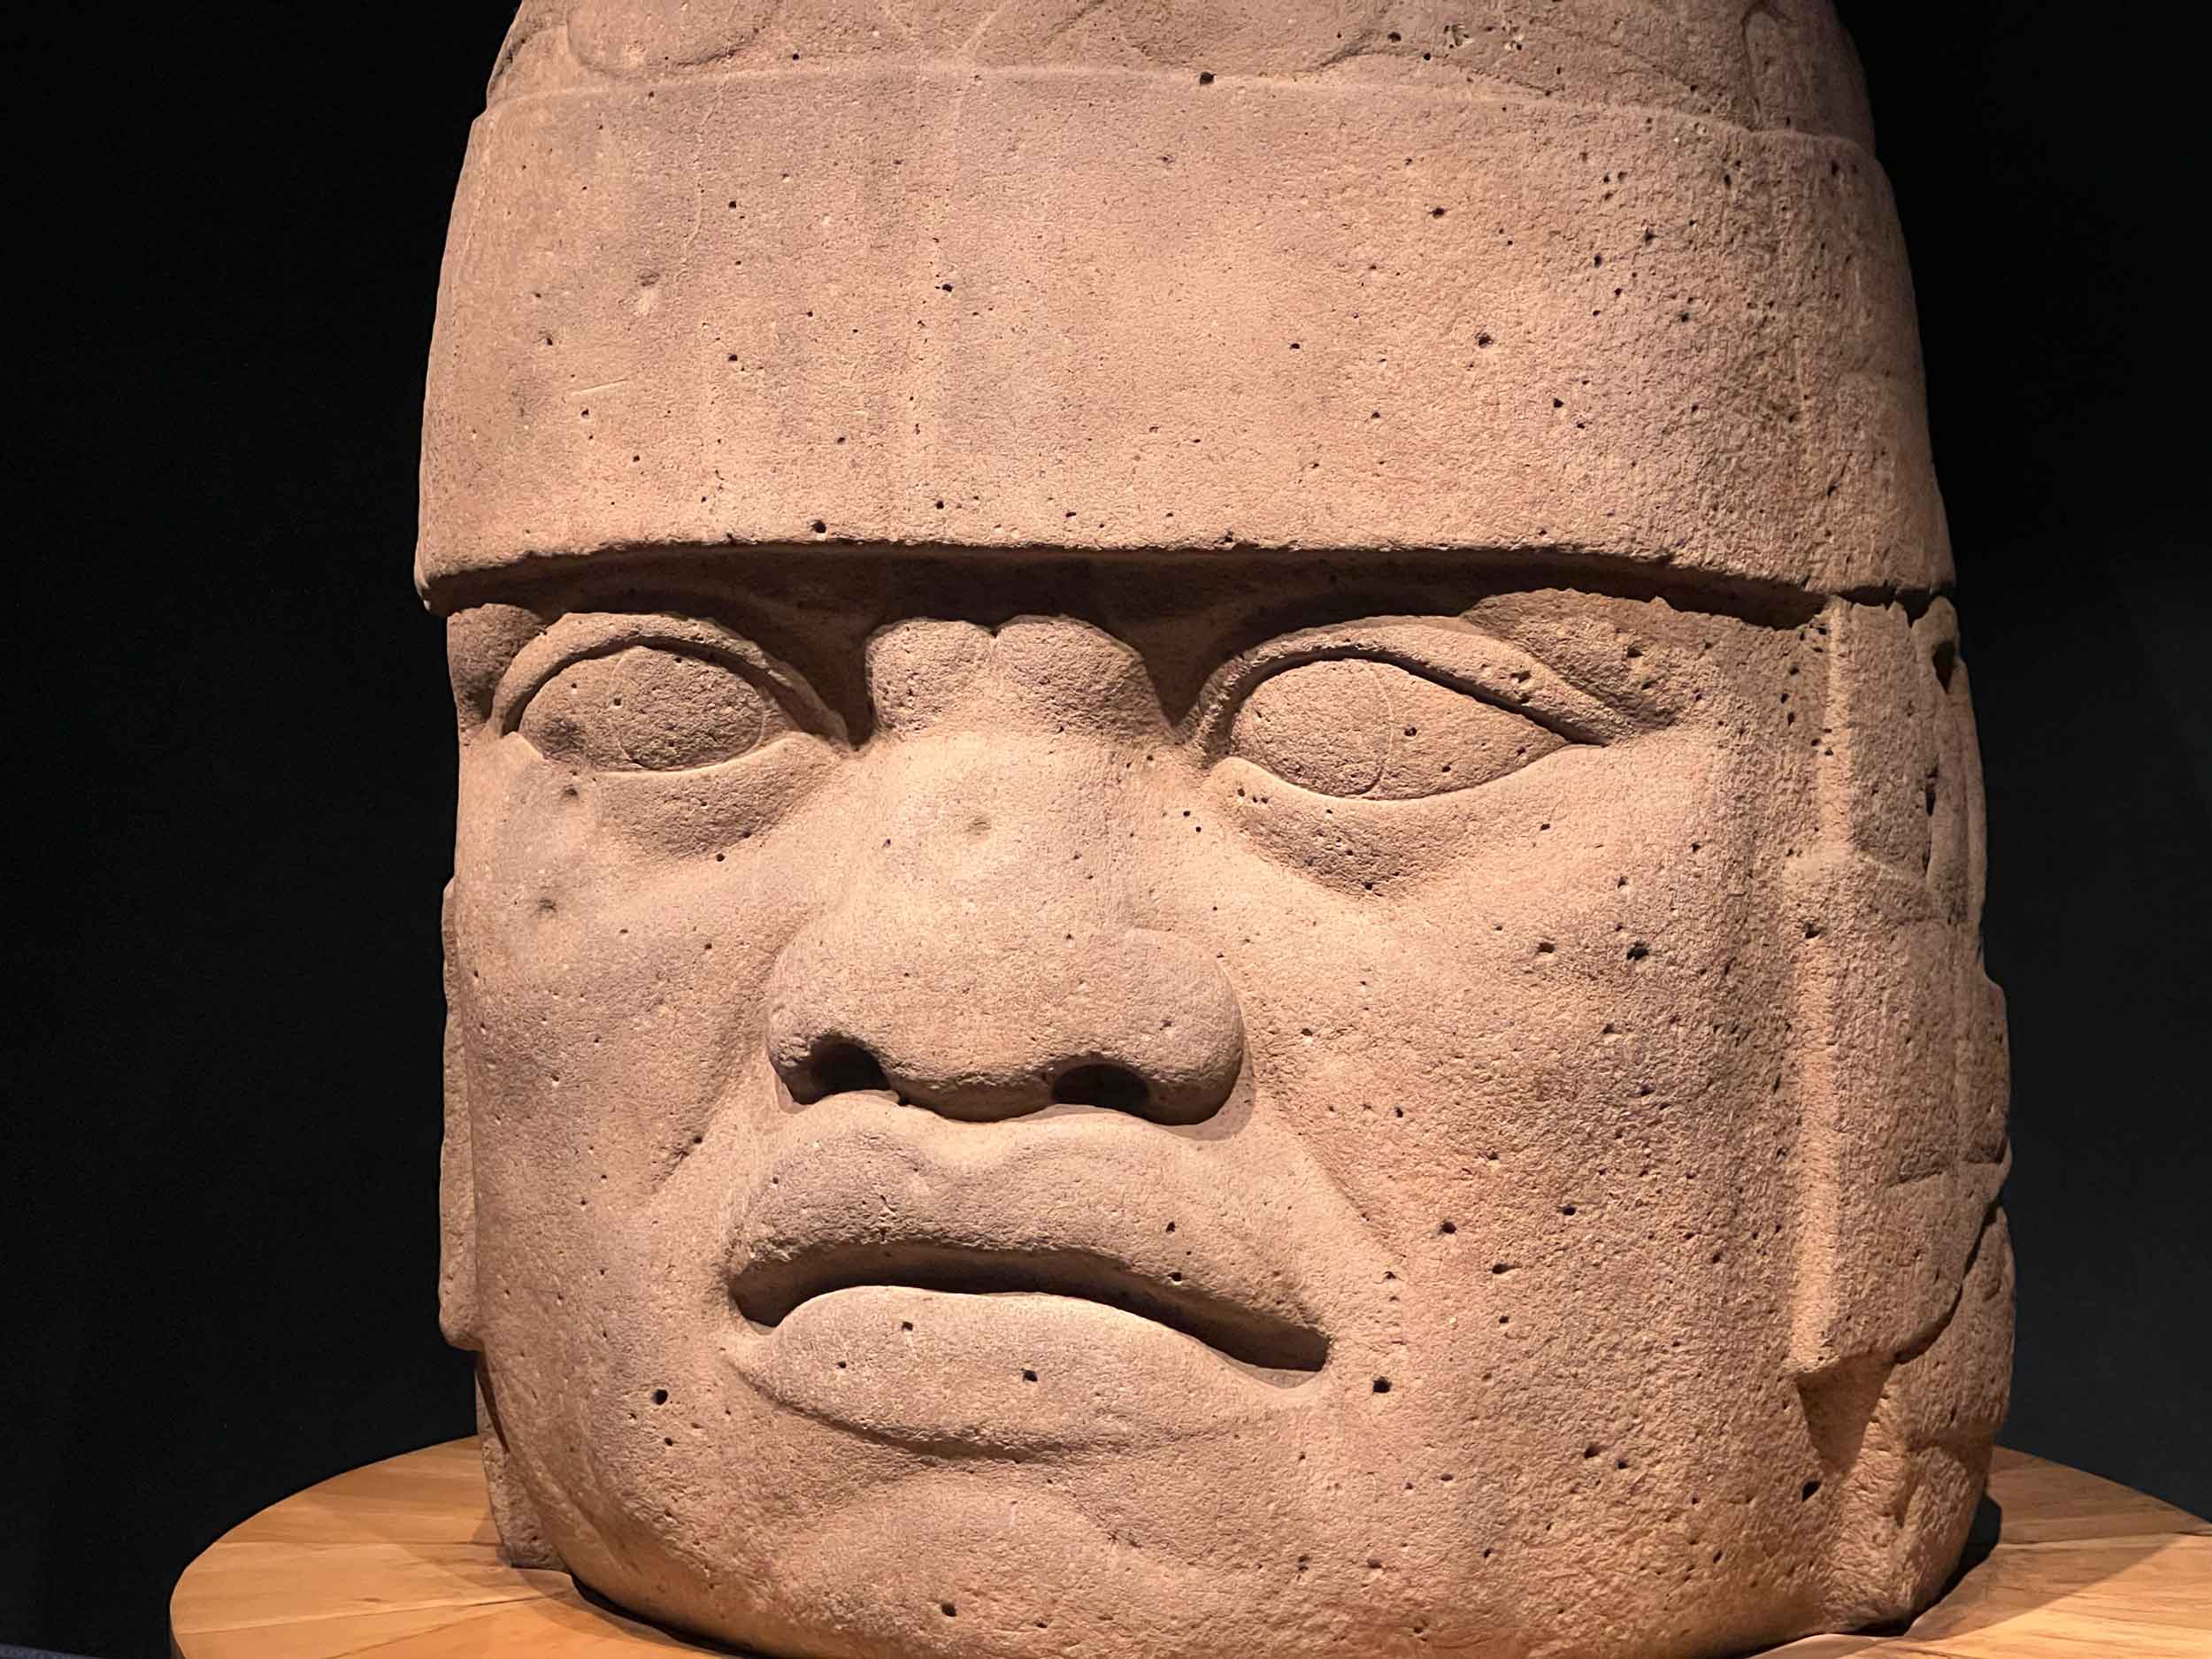 Very large head with headdress carved from stone, sitting upon a round platform